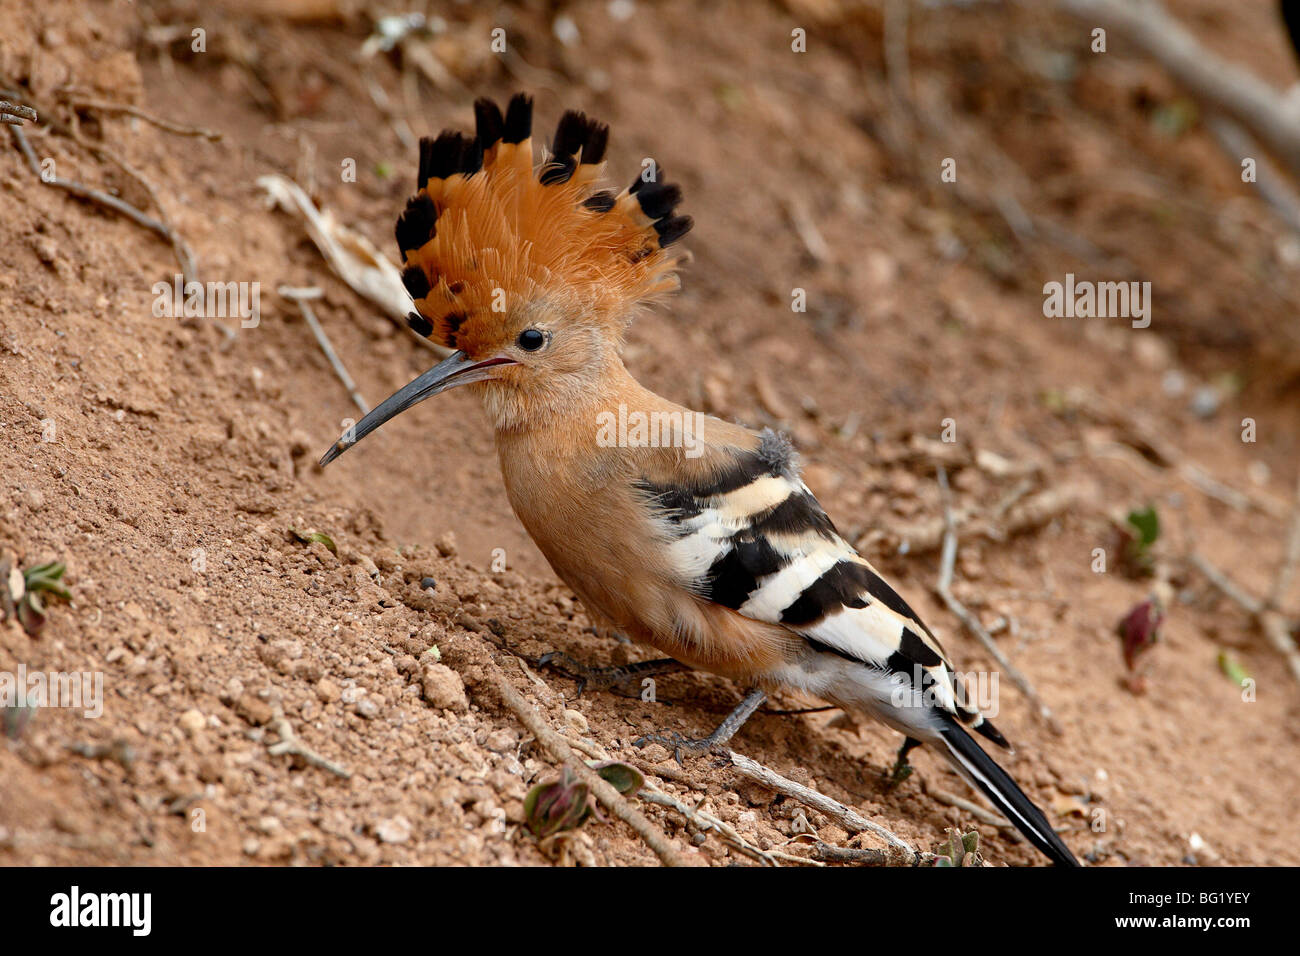 African hoopoe (Upupa africana) with its crest extended, Addo Elephant National Park, South Africa, Africa Stock Photo